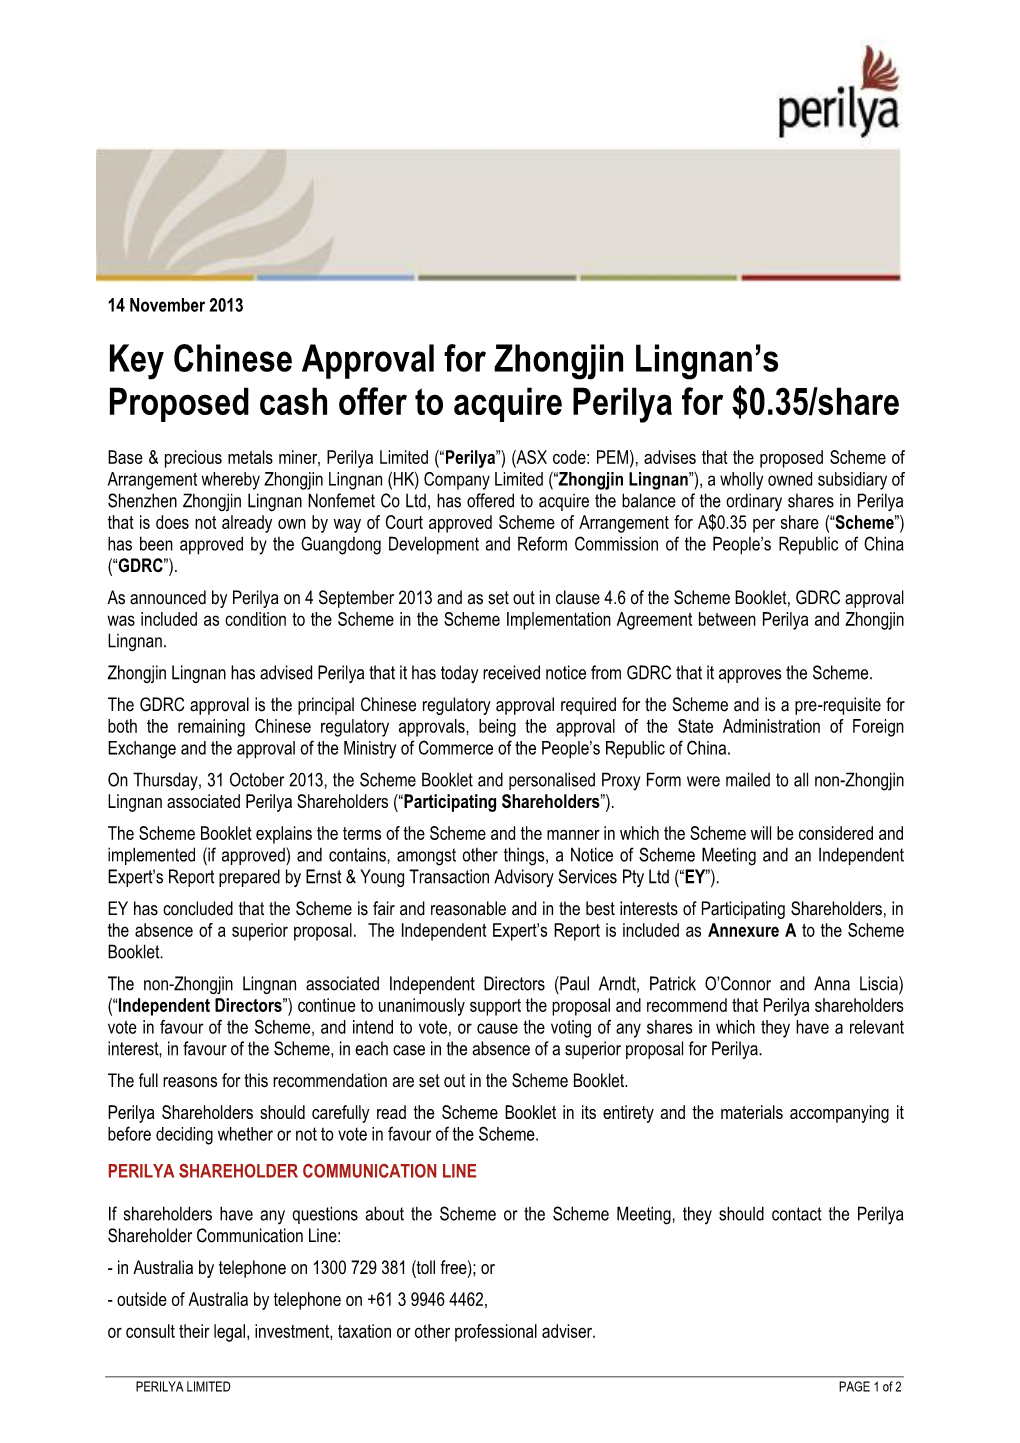 Key Chinese Approval for Zhongjin Lingnan's Proposed Cash Offer To